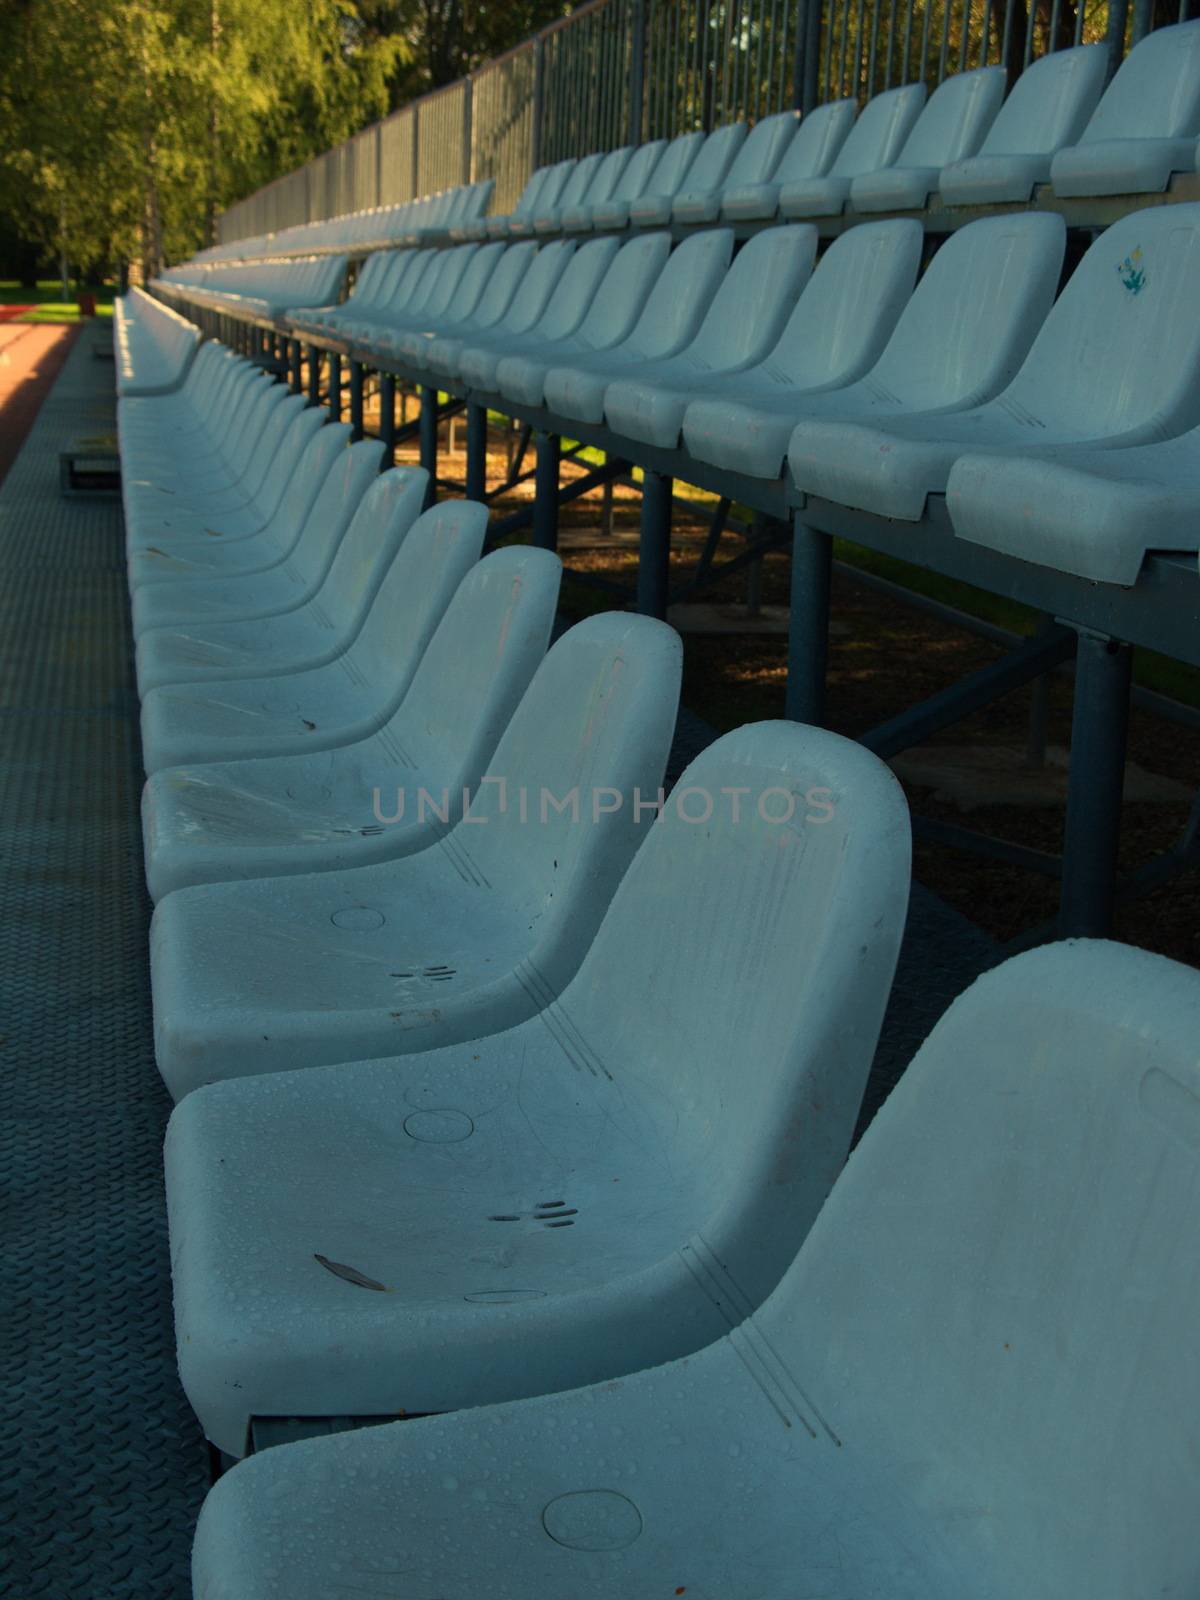 Rows of chairs in a small stadium